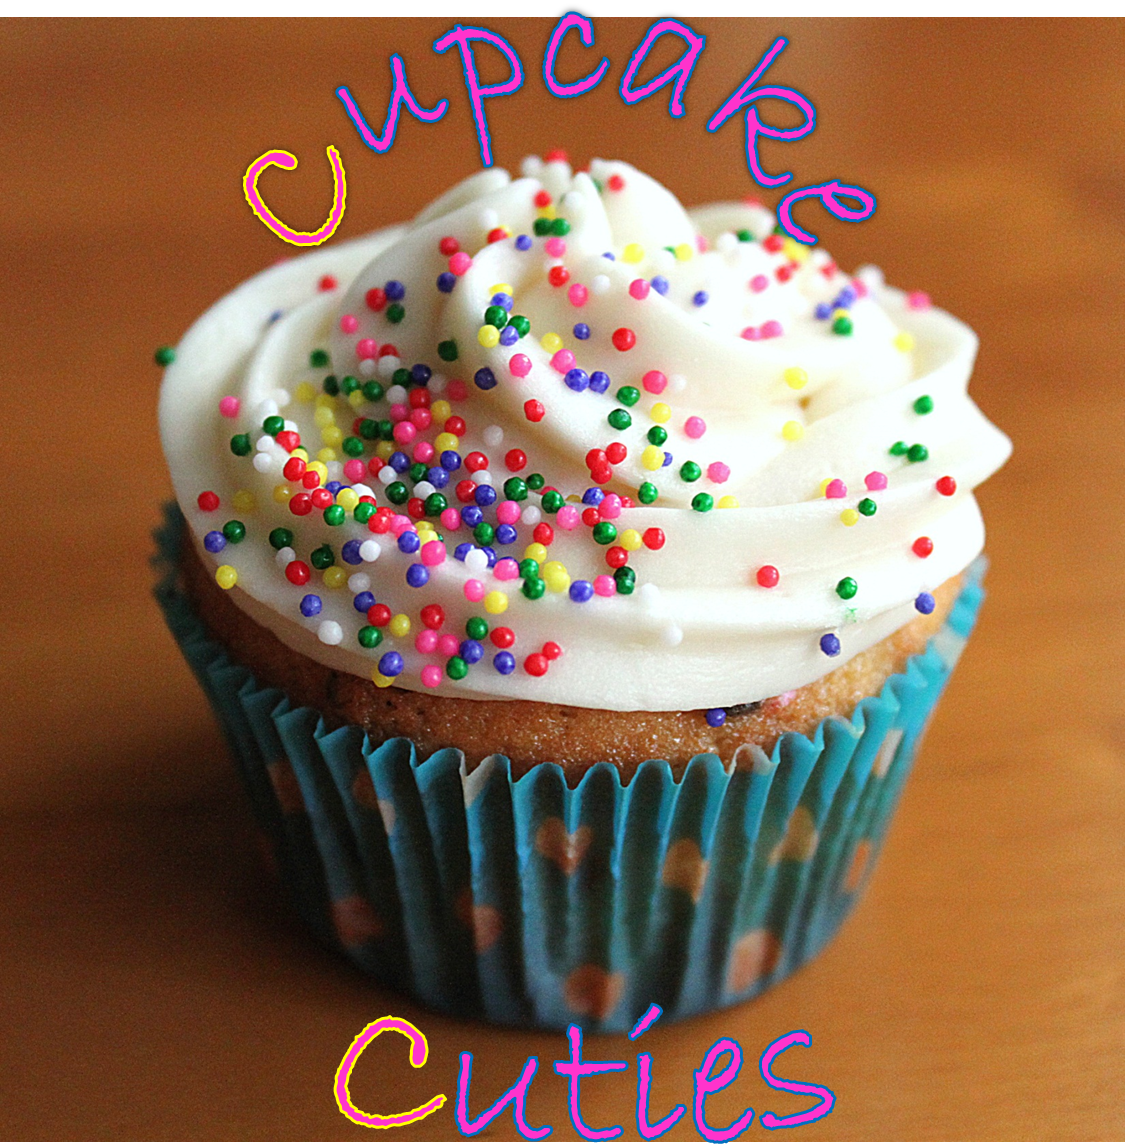 Kids “Decorate Your Own Cupcake” Day at Cupcake Cuties